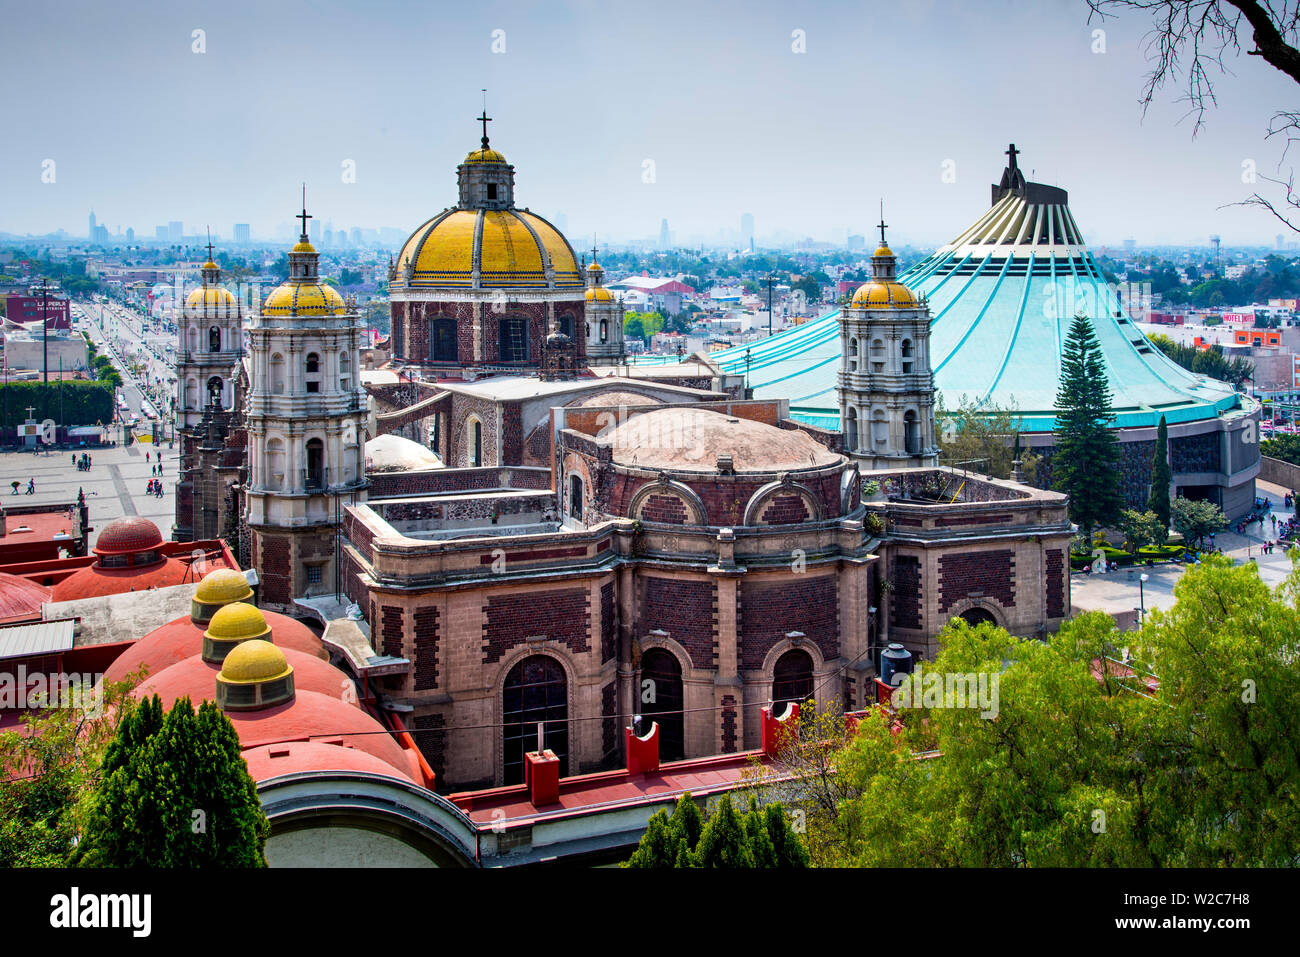 Mexico, Mexico City, Basilica of Our Lady of Guadalupe, La Villa de Guadalupe, National Shrine, Catholic Pilgrimage Site, The Most Visited Catholic Shine In The World Stock Photo